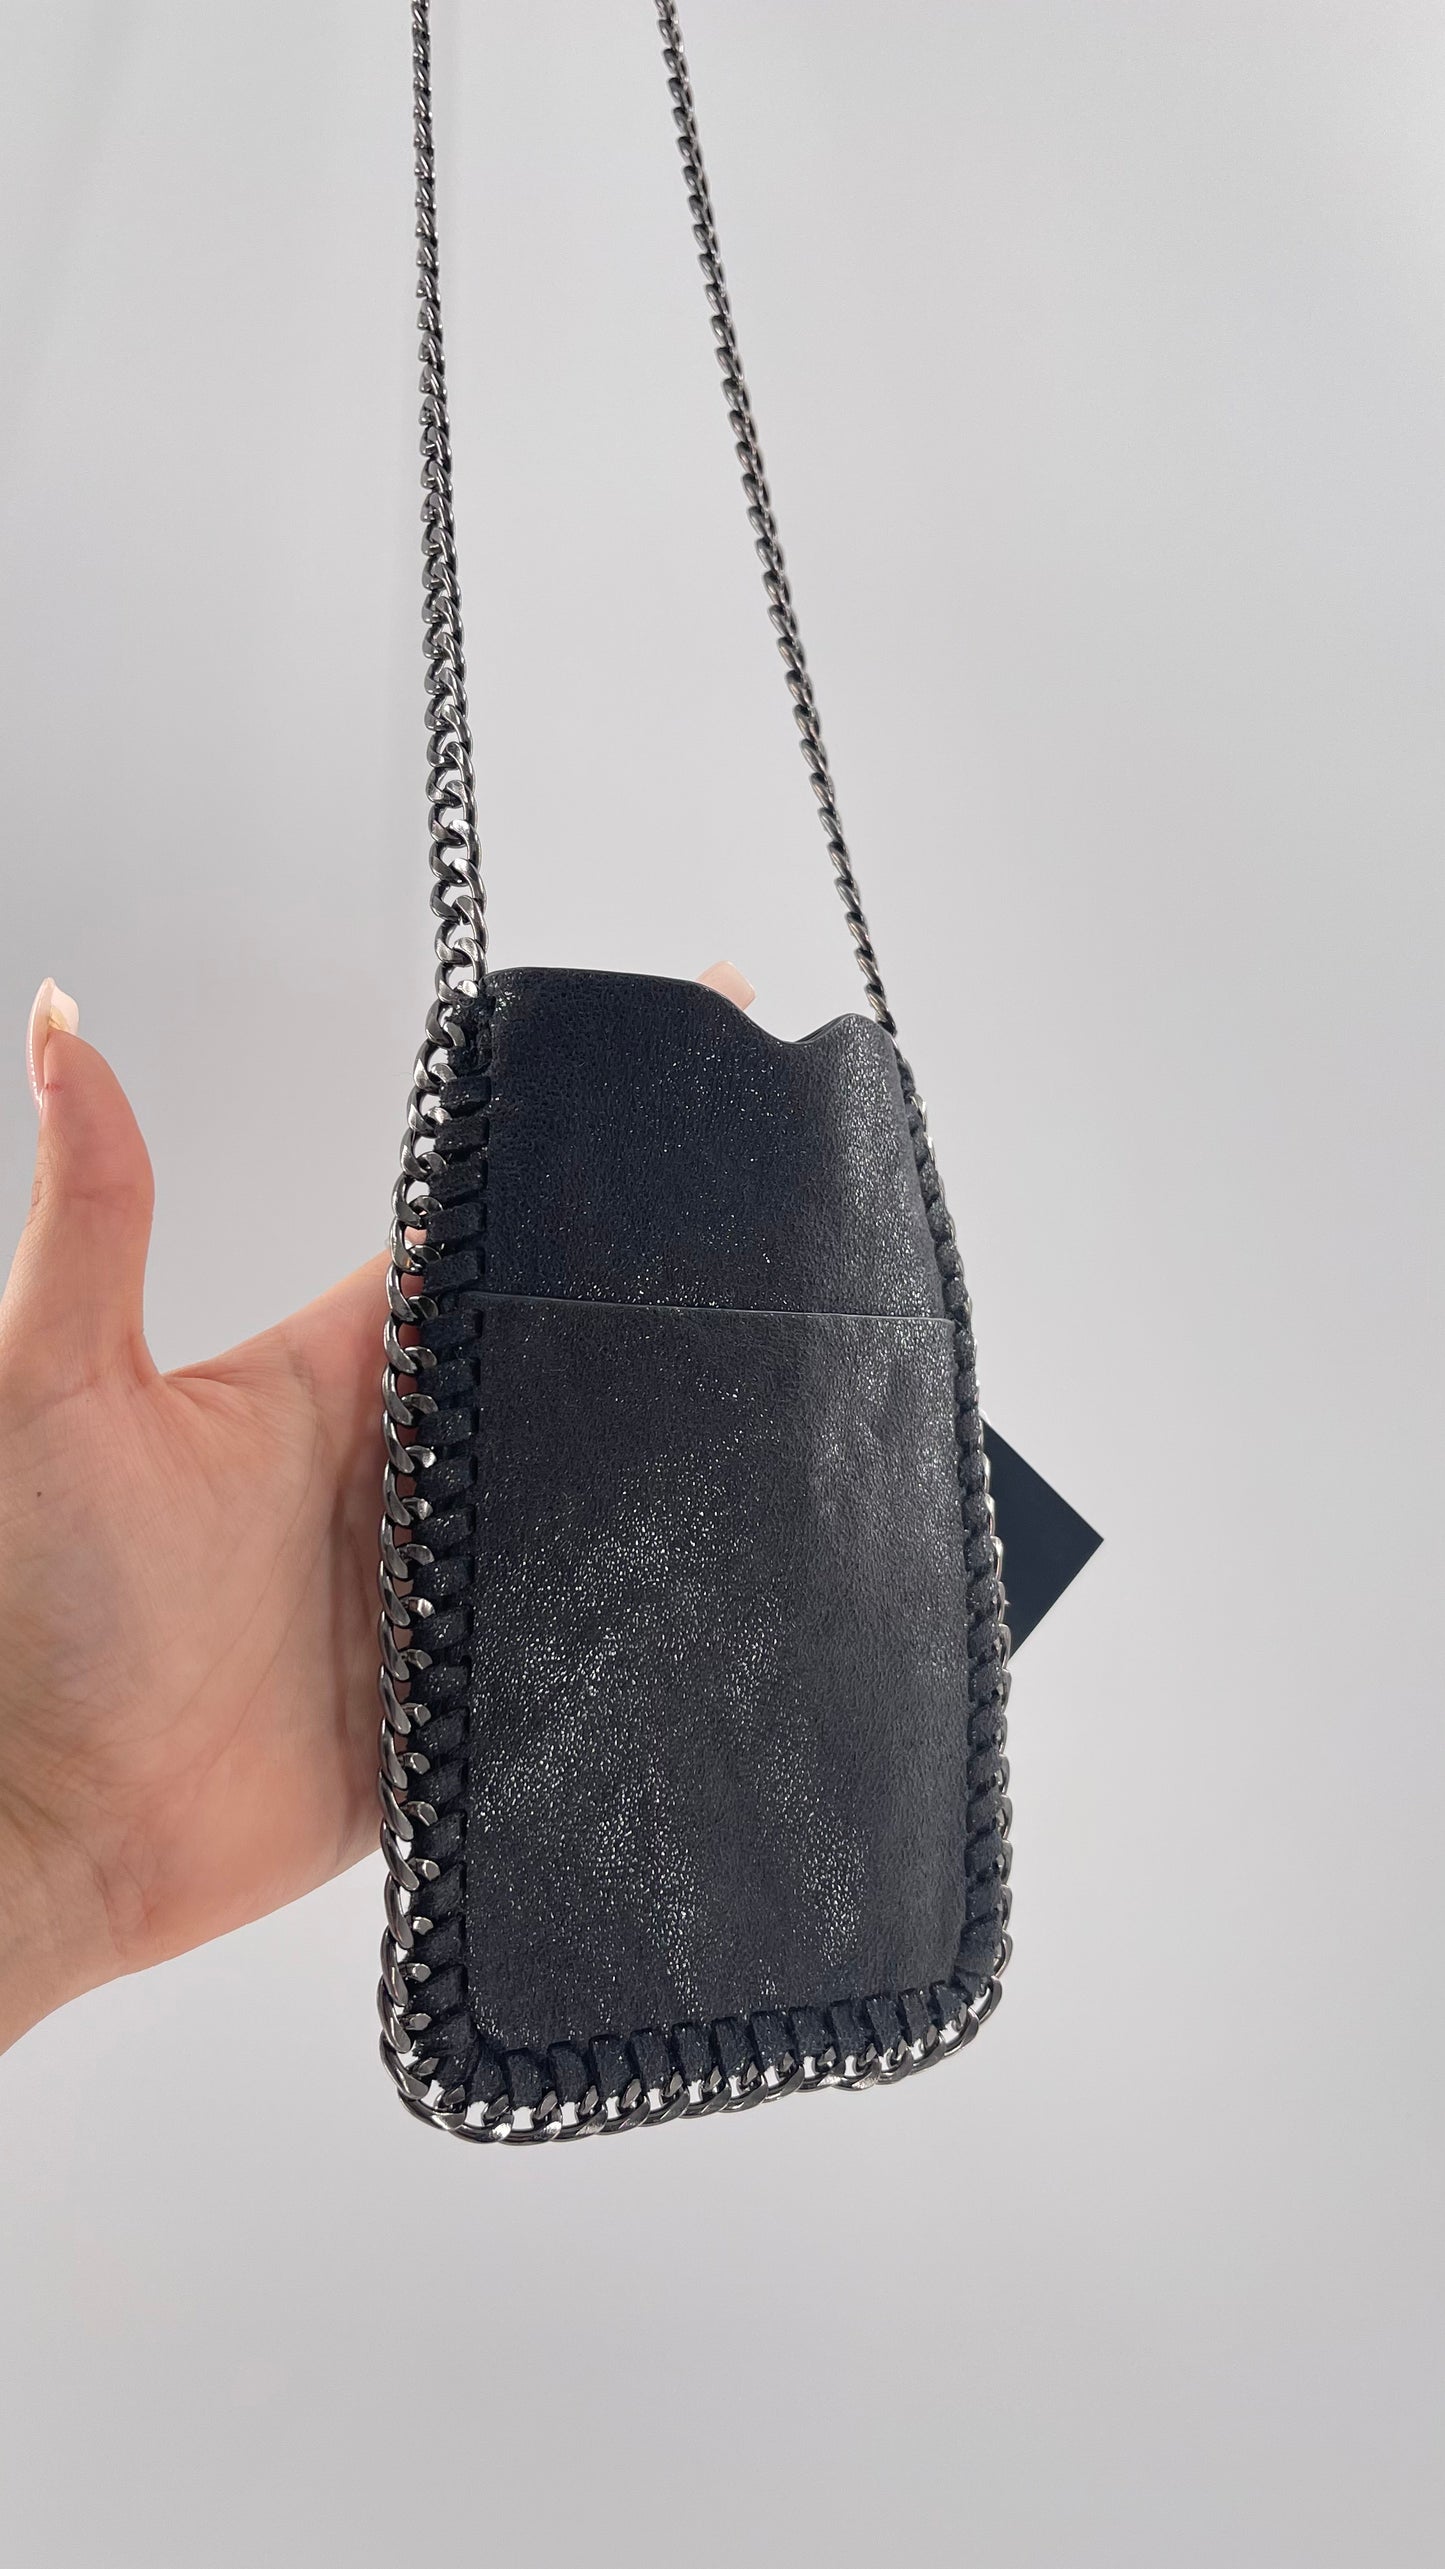 Metallic Black Leather Chain Lined Phone Pouch